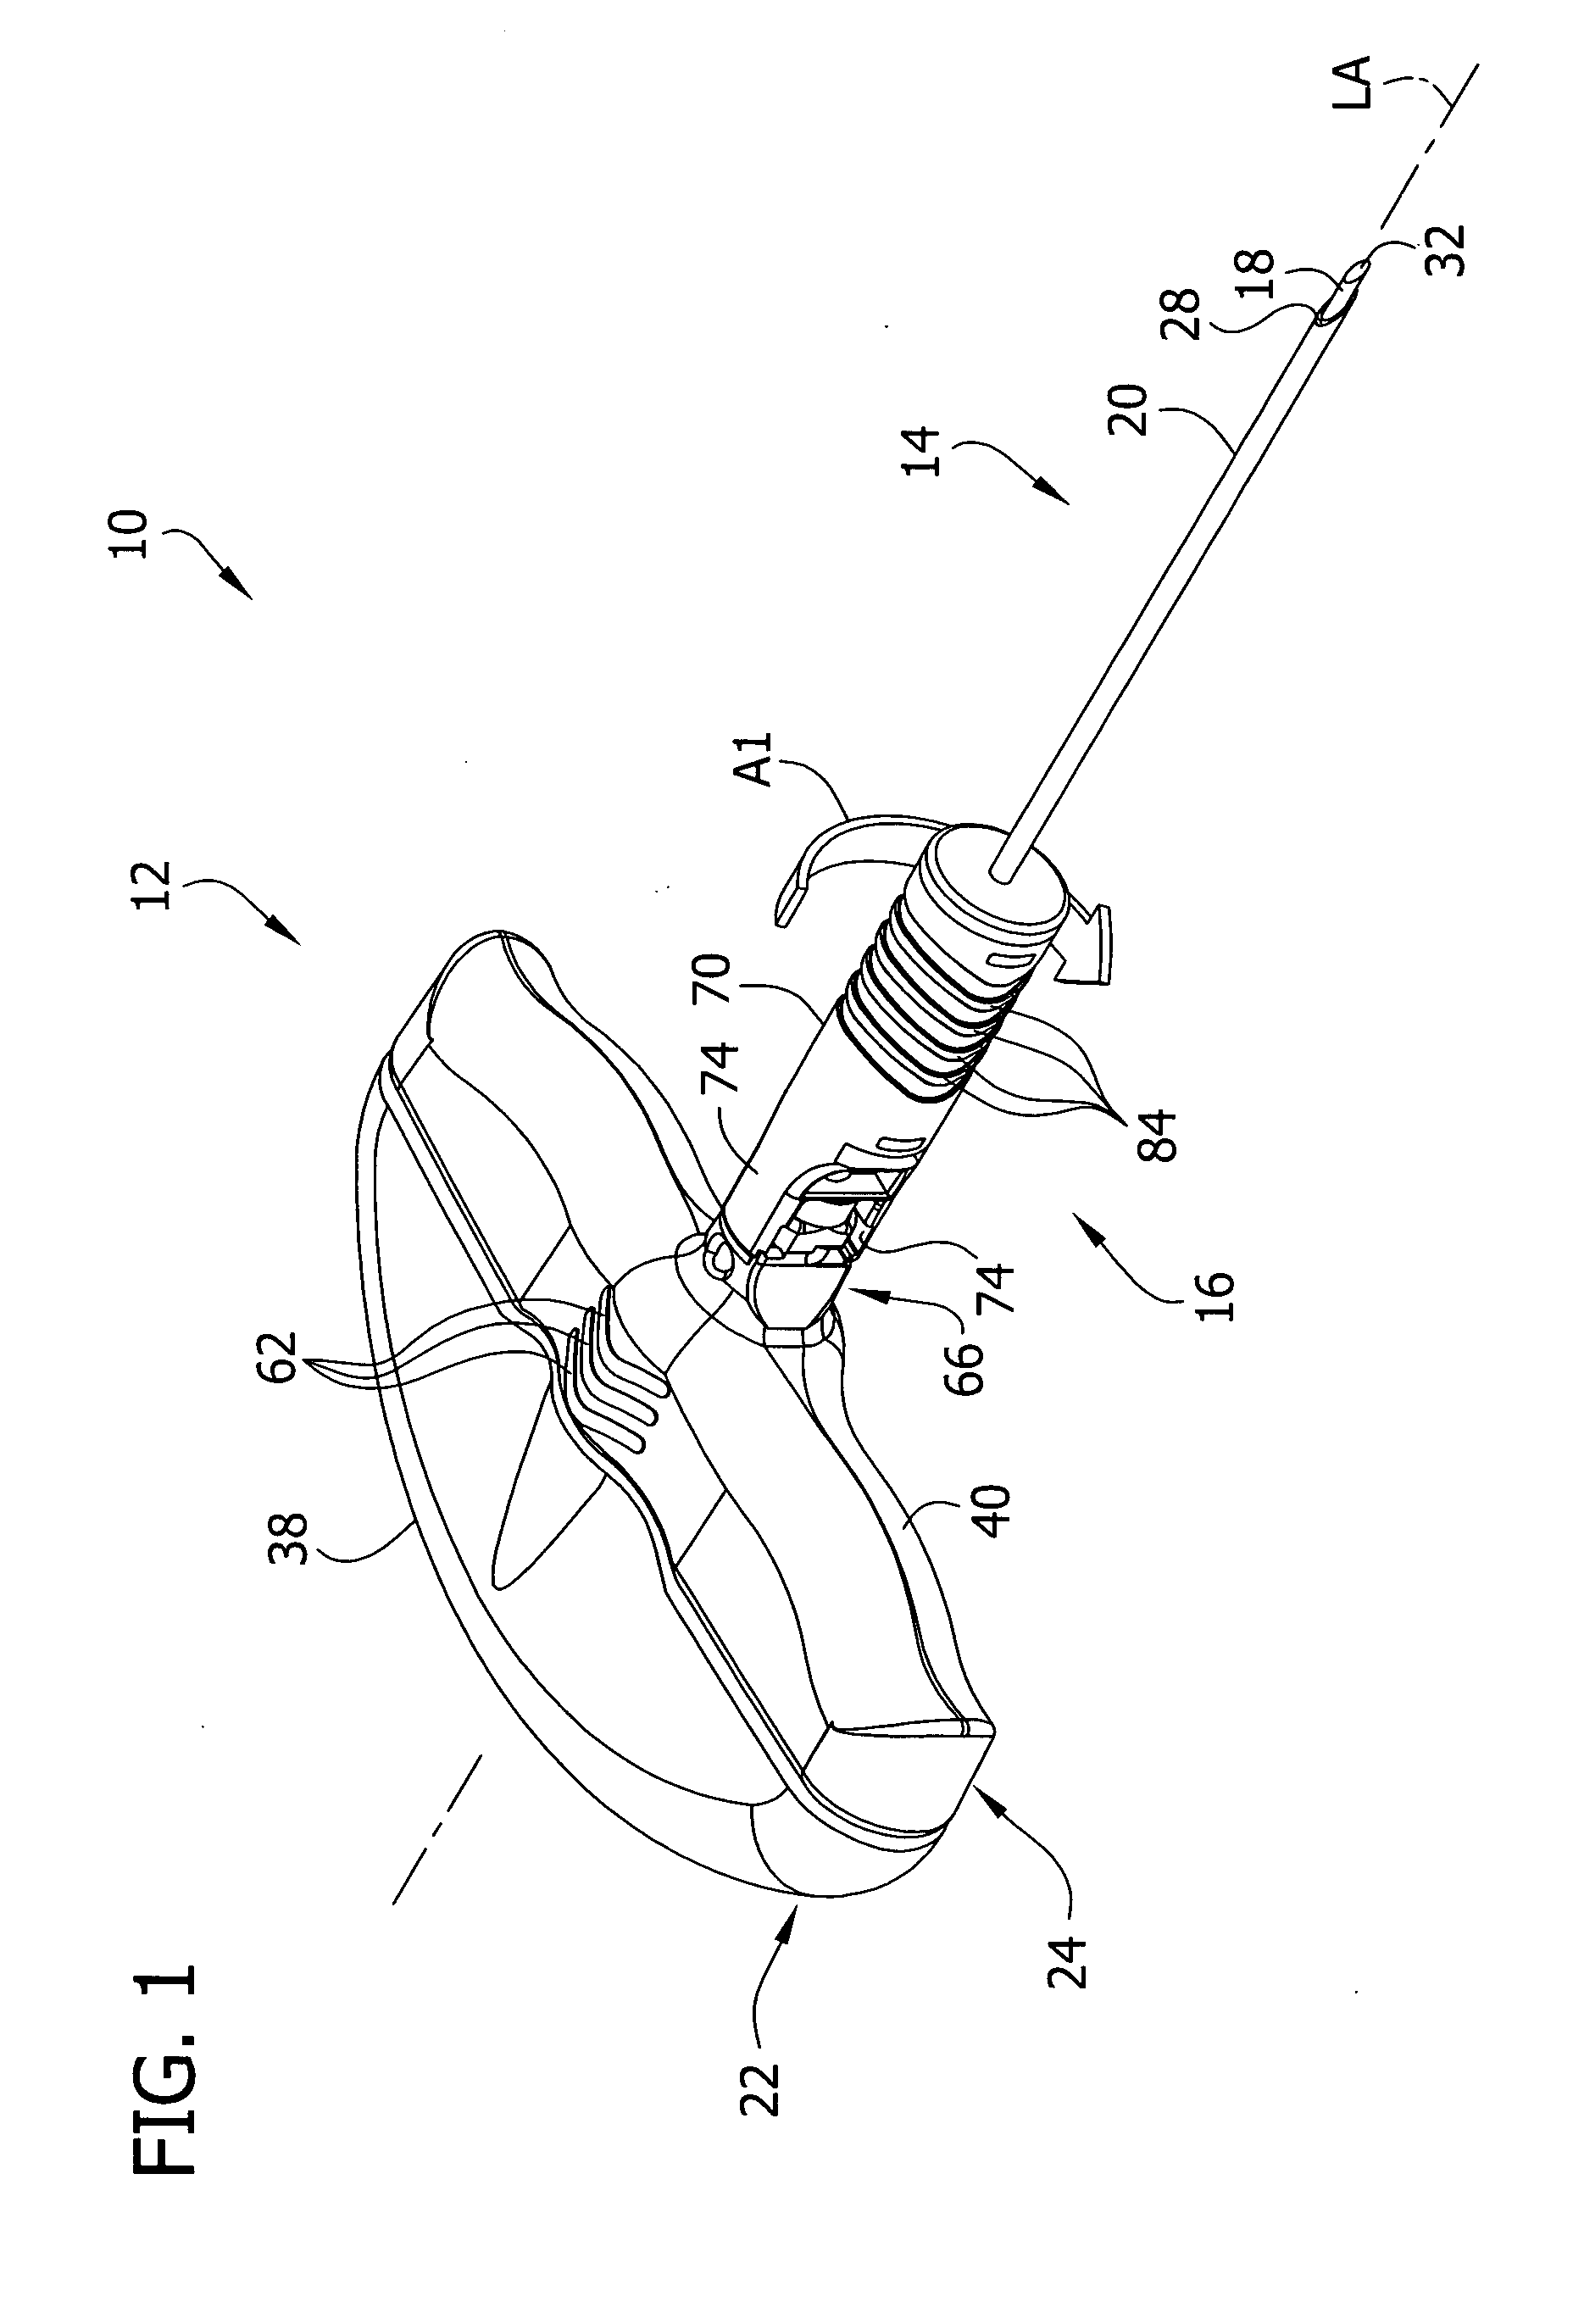 Bayonet release of safety shield for needle tip